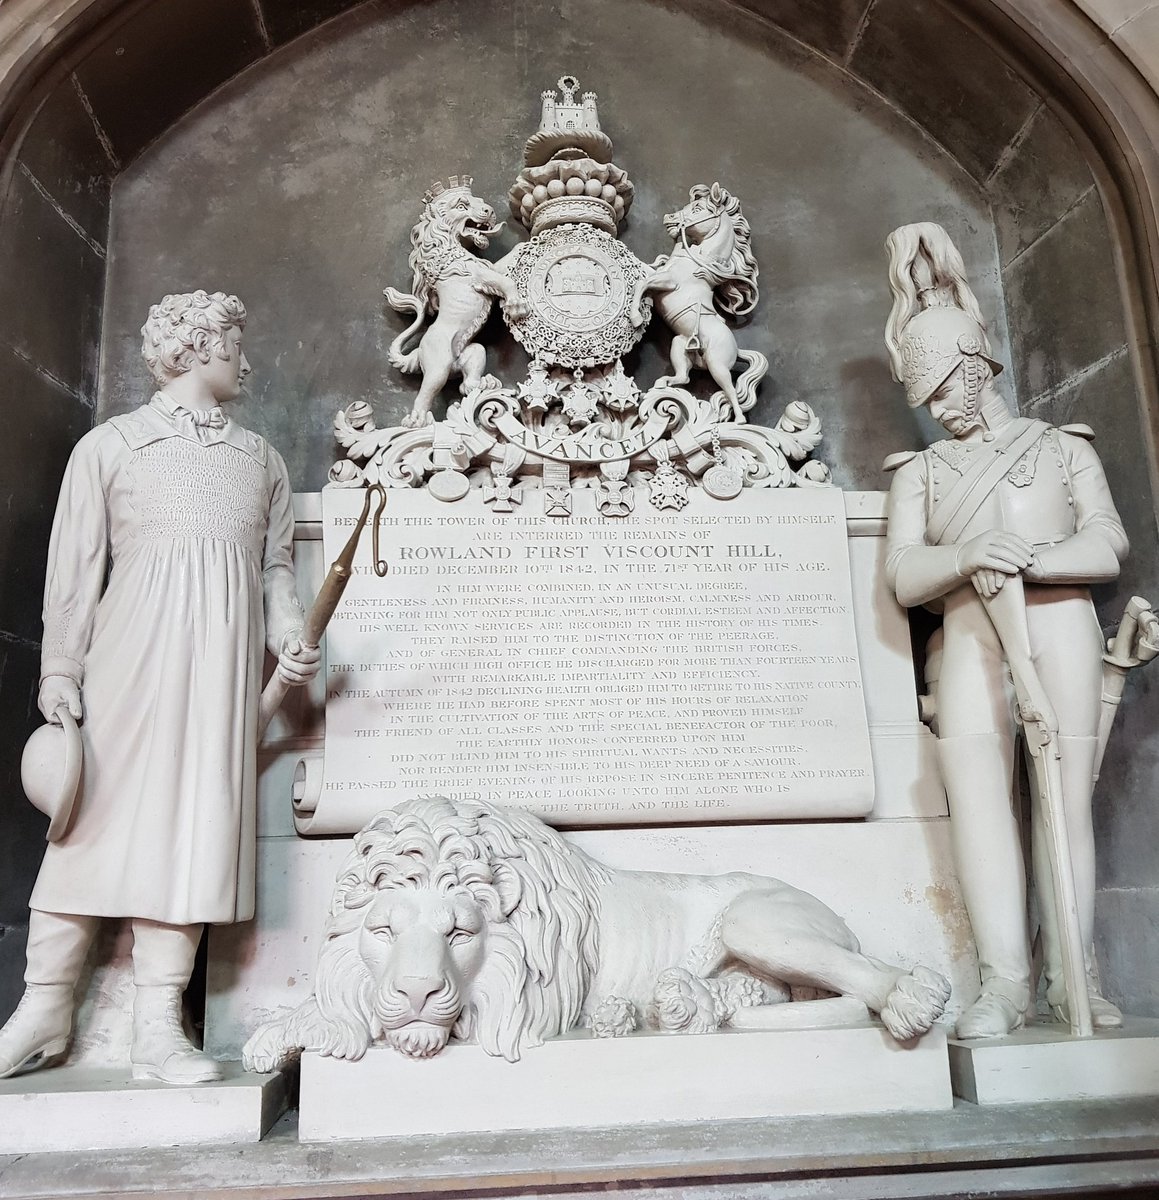 Memorial to General Rowland 'Daddy' Hill, 1st Viscount Hill, who fought in the Napoleonic Wars. He was born in Hawkstone Hall #OTD 1772. St Mary's Magdalene Church, Hadnall #Shropshire #AnimalsInChurches #HorseSense #AnimalsInChurchesHour